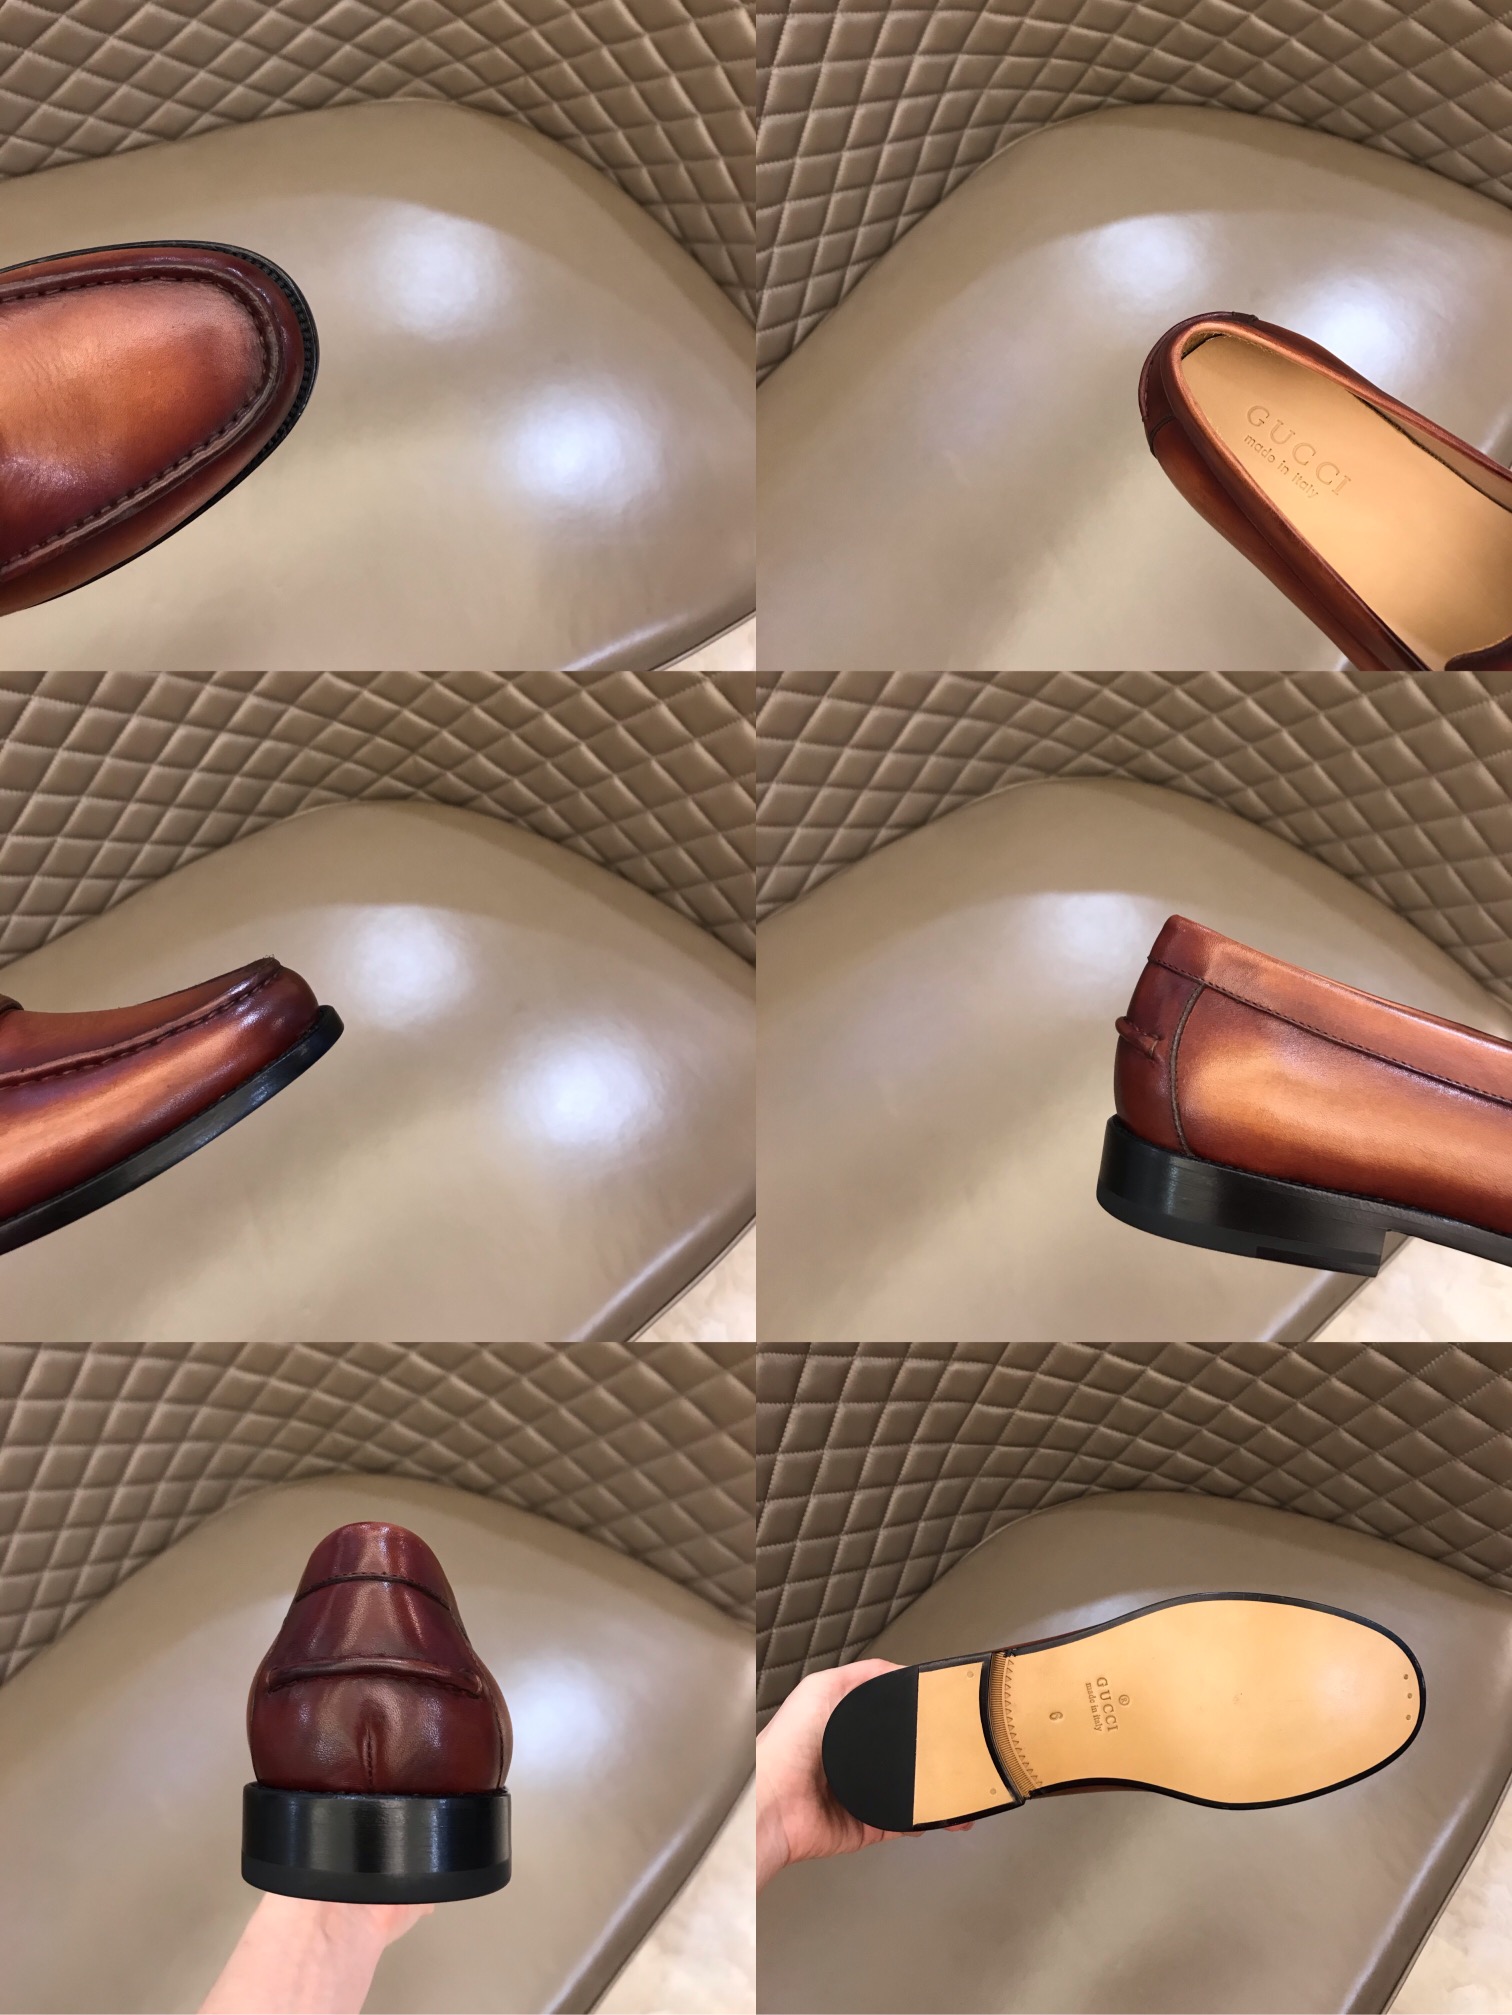 Gucci Dress Shoe in Brown